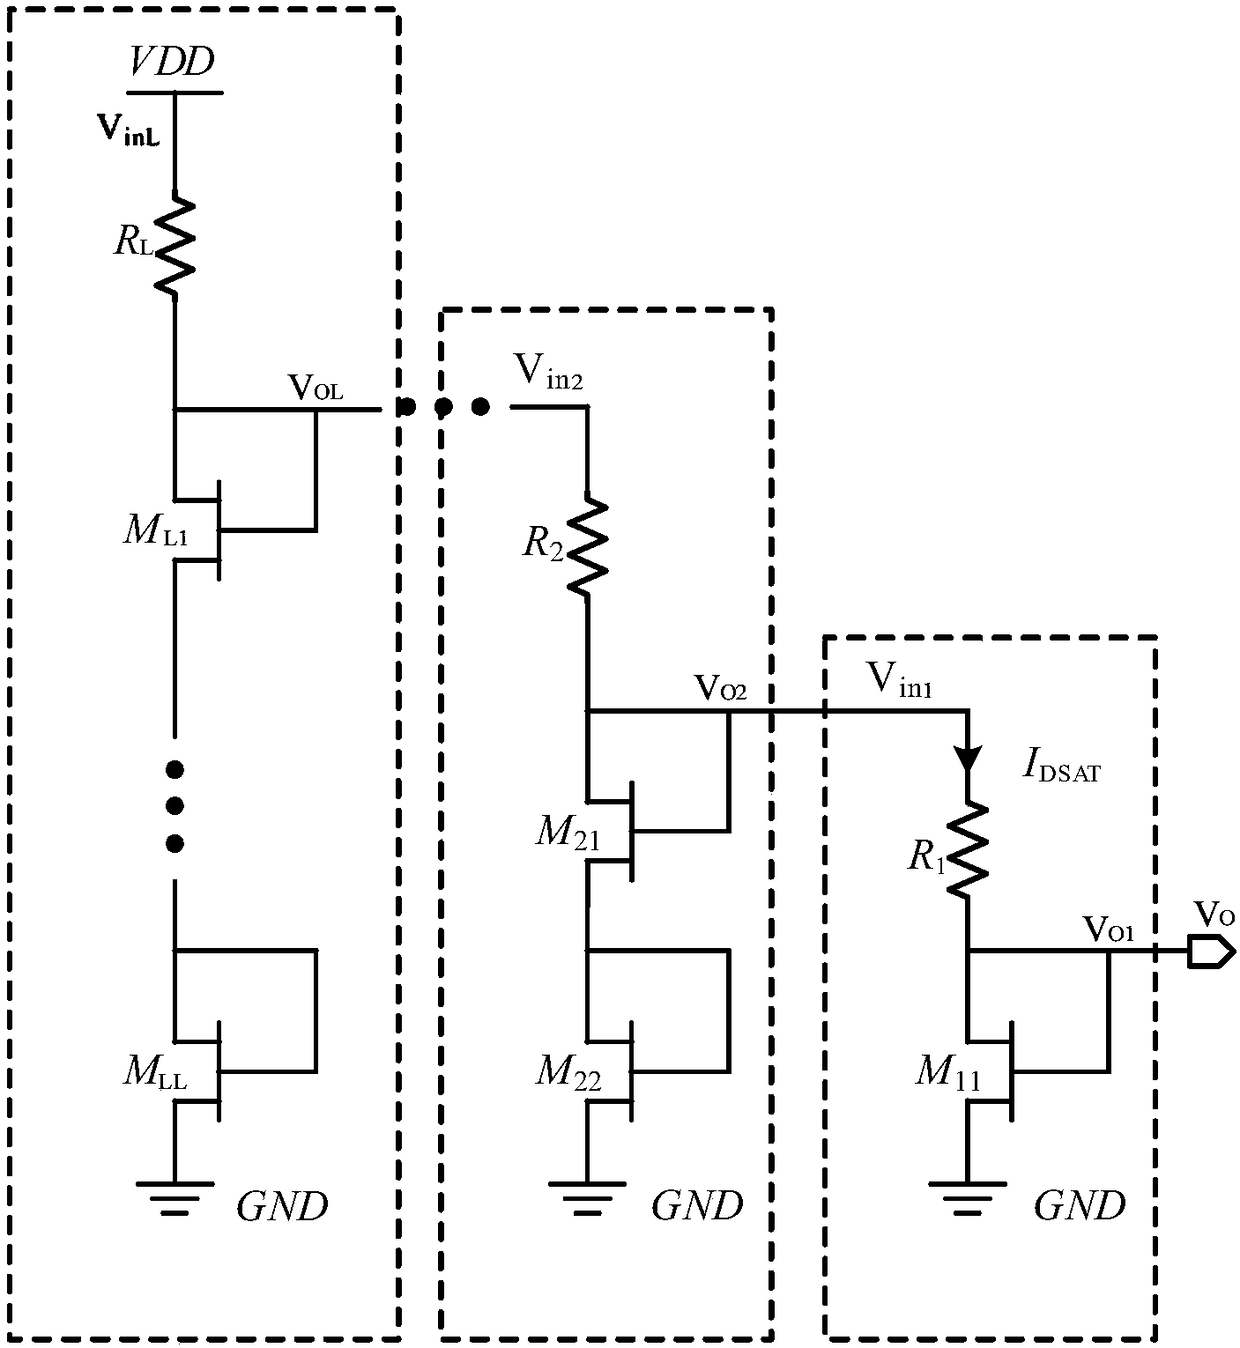 Biasing circuit and integrated module based on GaAs PHEMT (pseudomorphic high-electron-mobility transistor) process